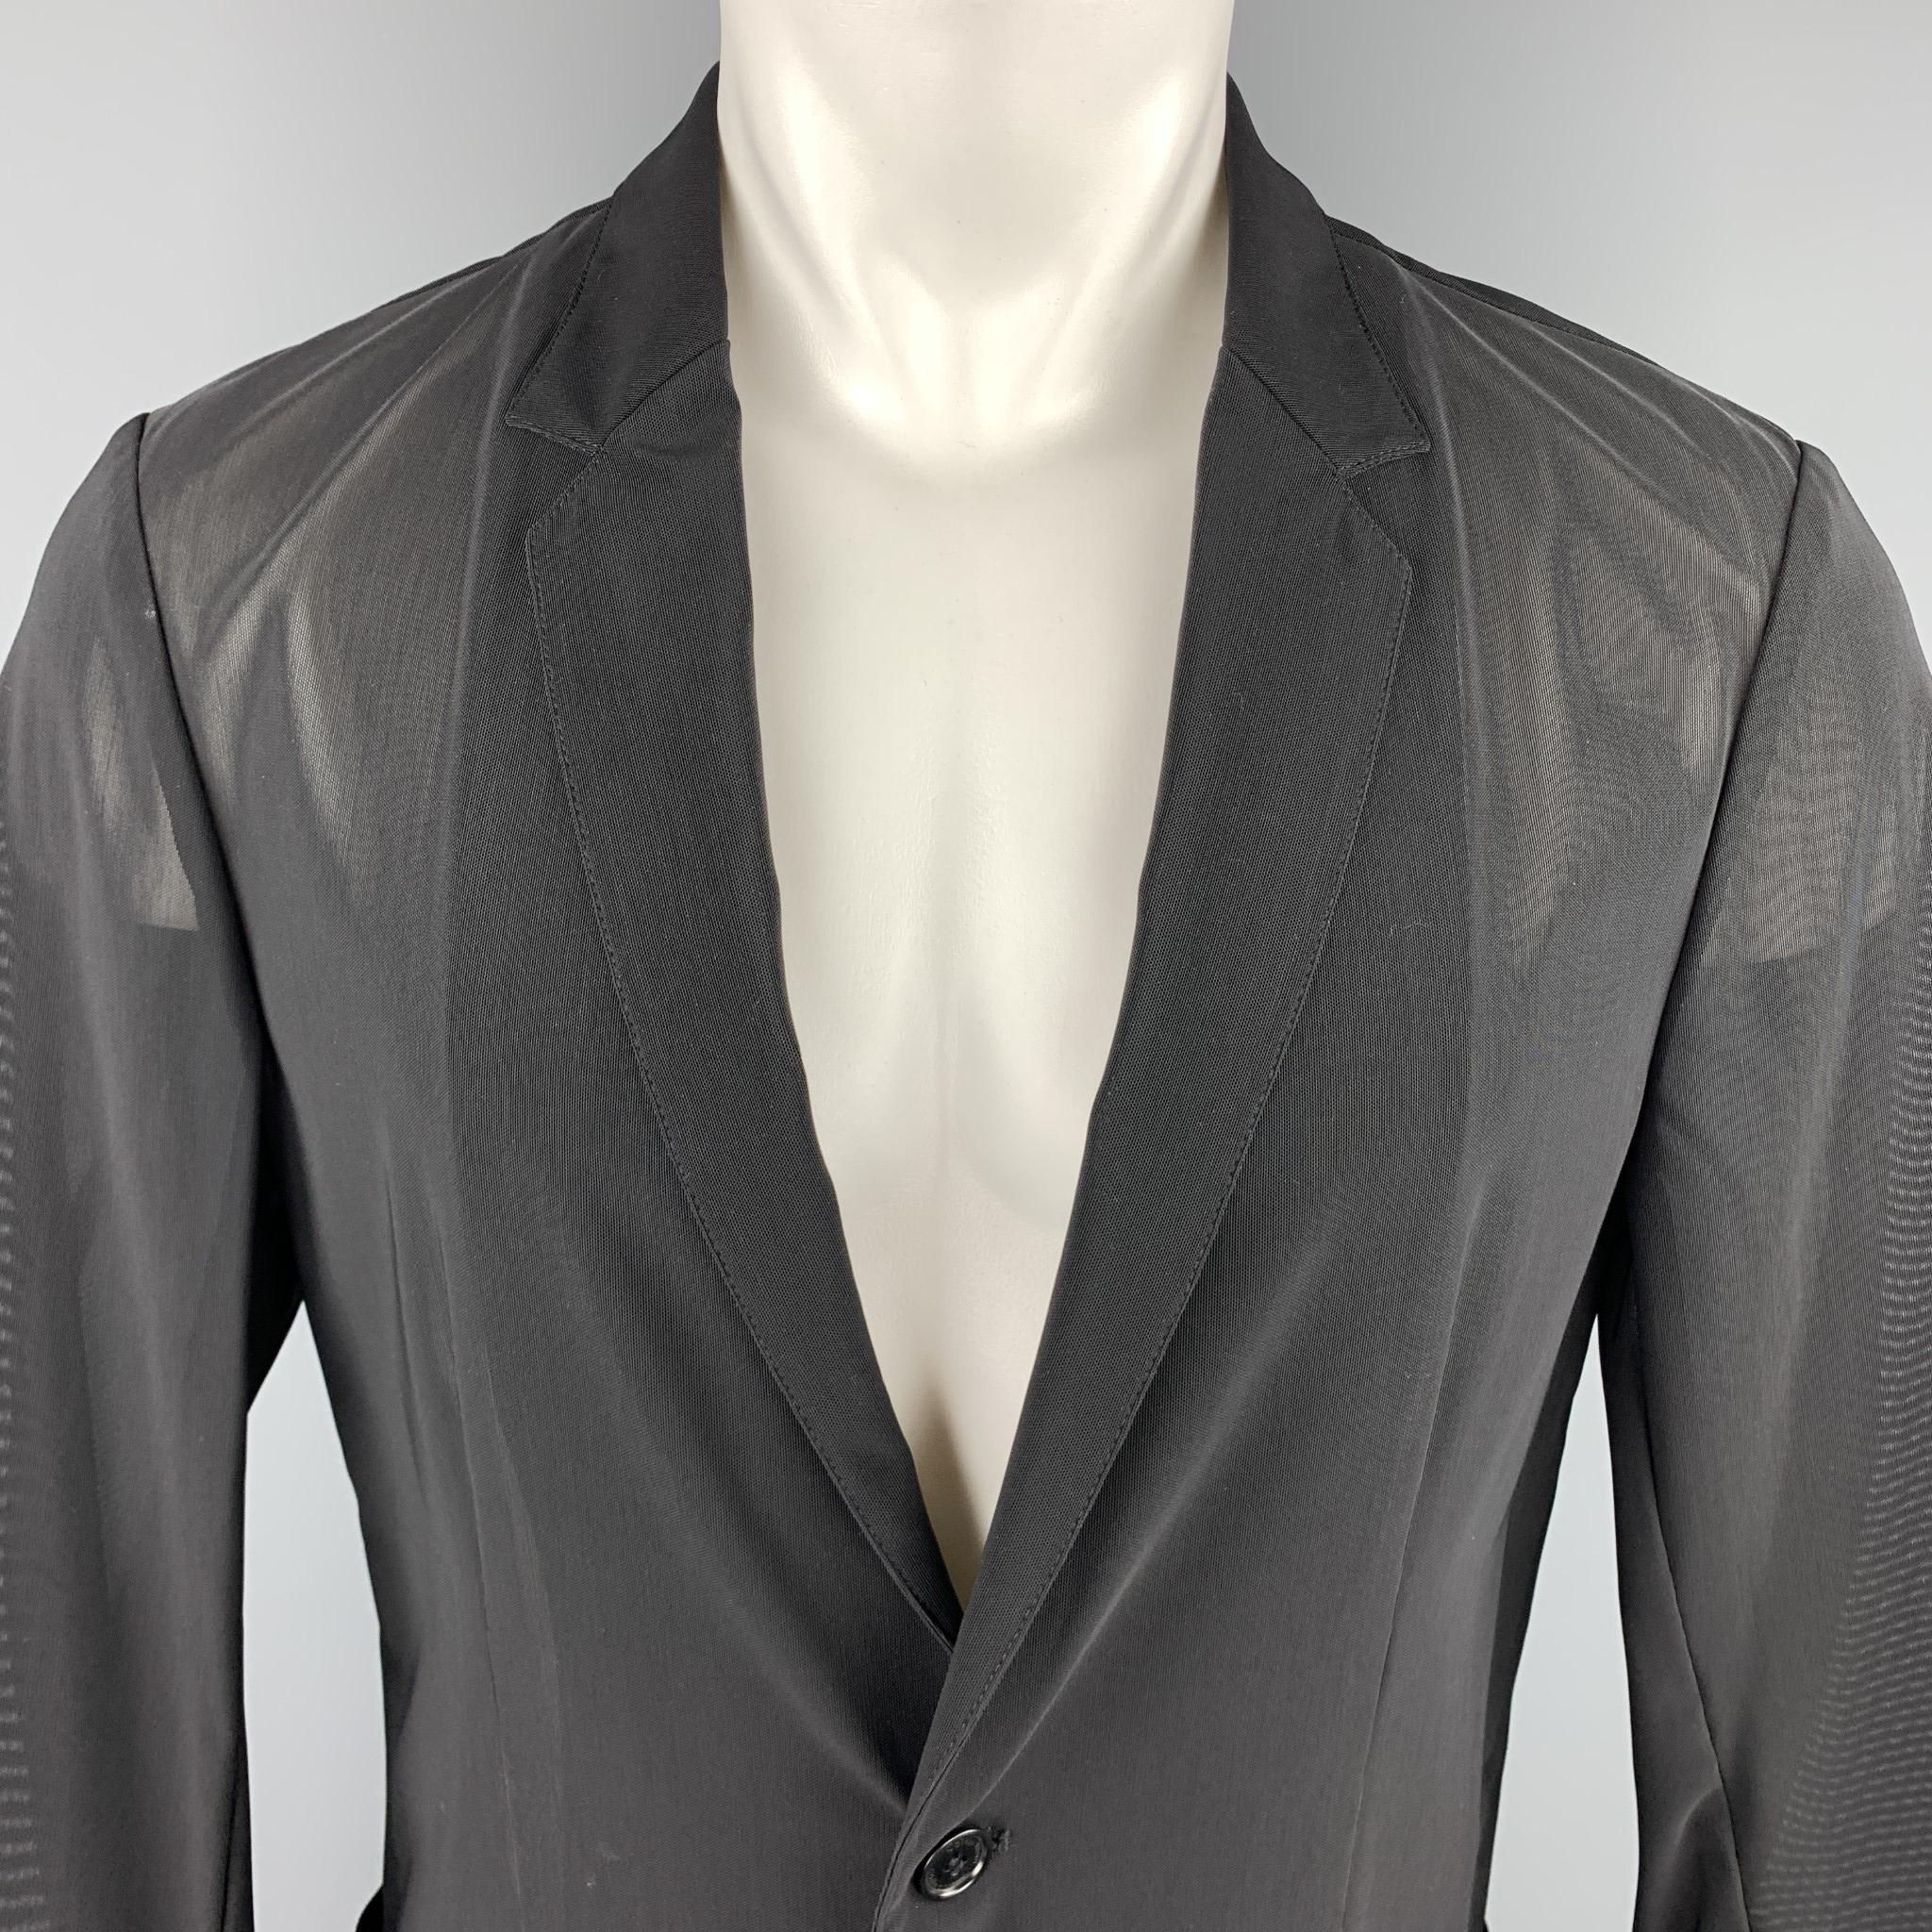 CALVIN KLEIN COLLECTION sport coat comes in sheer stretch mesh with a notch lapel, single breasted, two button front, and pockets. Made in Italy.

Excellent Pre-Owned Condition.
Marked: US 40

Measurements:

Shoulder: 18 in.
Chest: 40 in.
Sleeve: 24